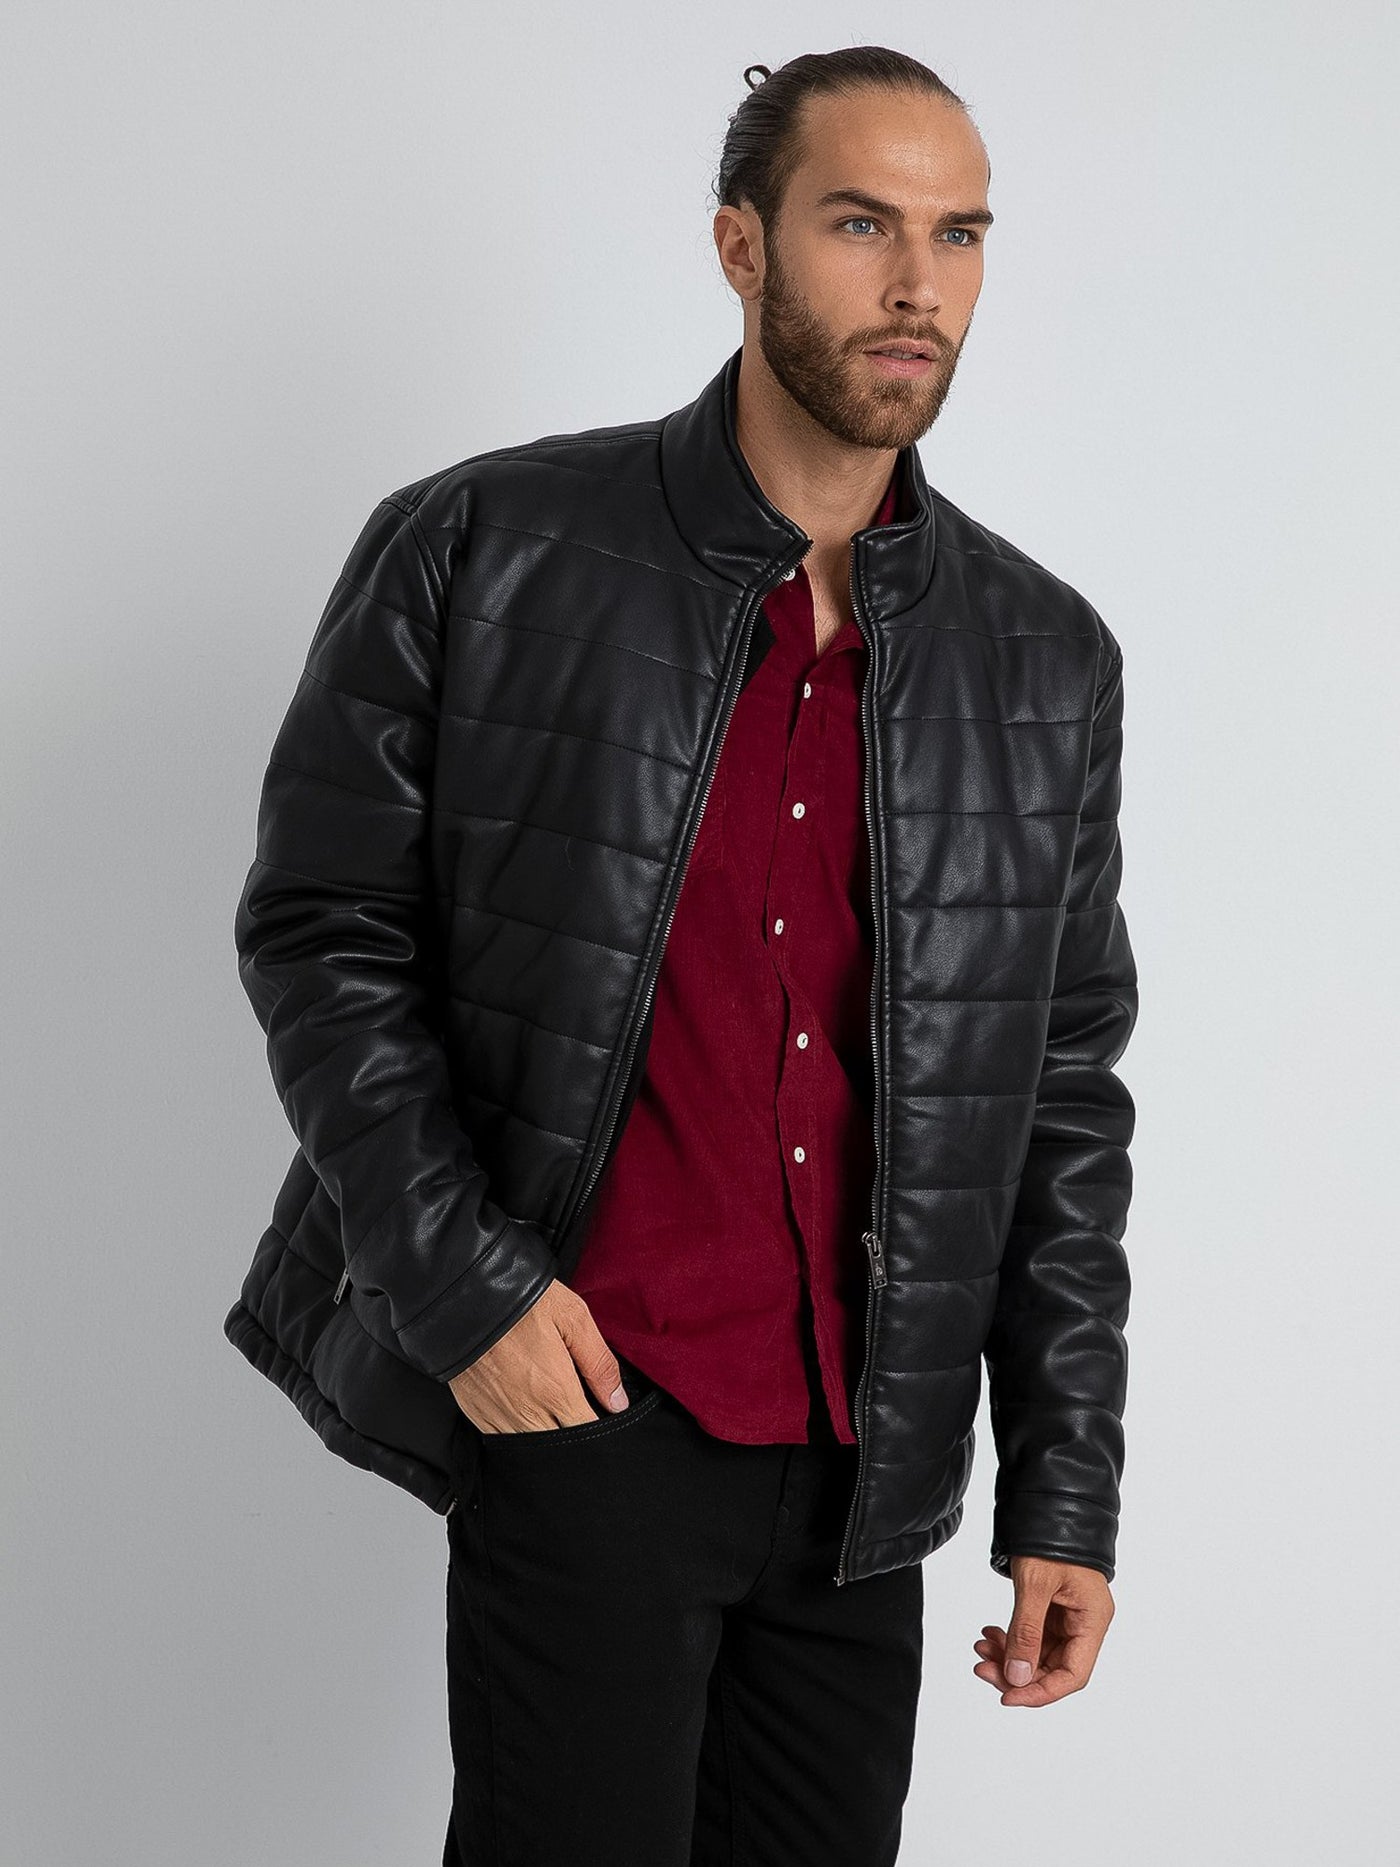 Dalydress Mens Quilted PU Leather Jacket